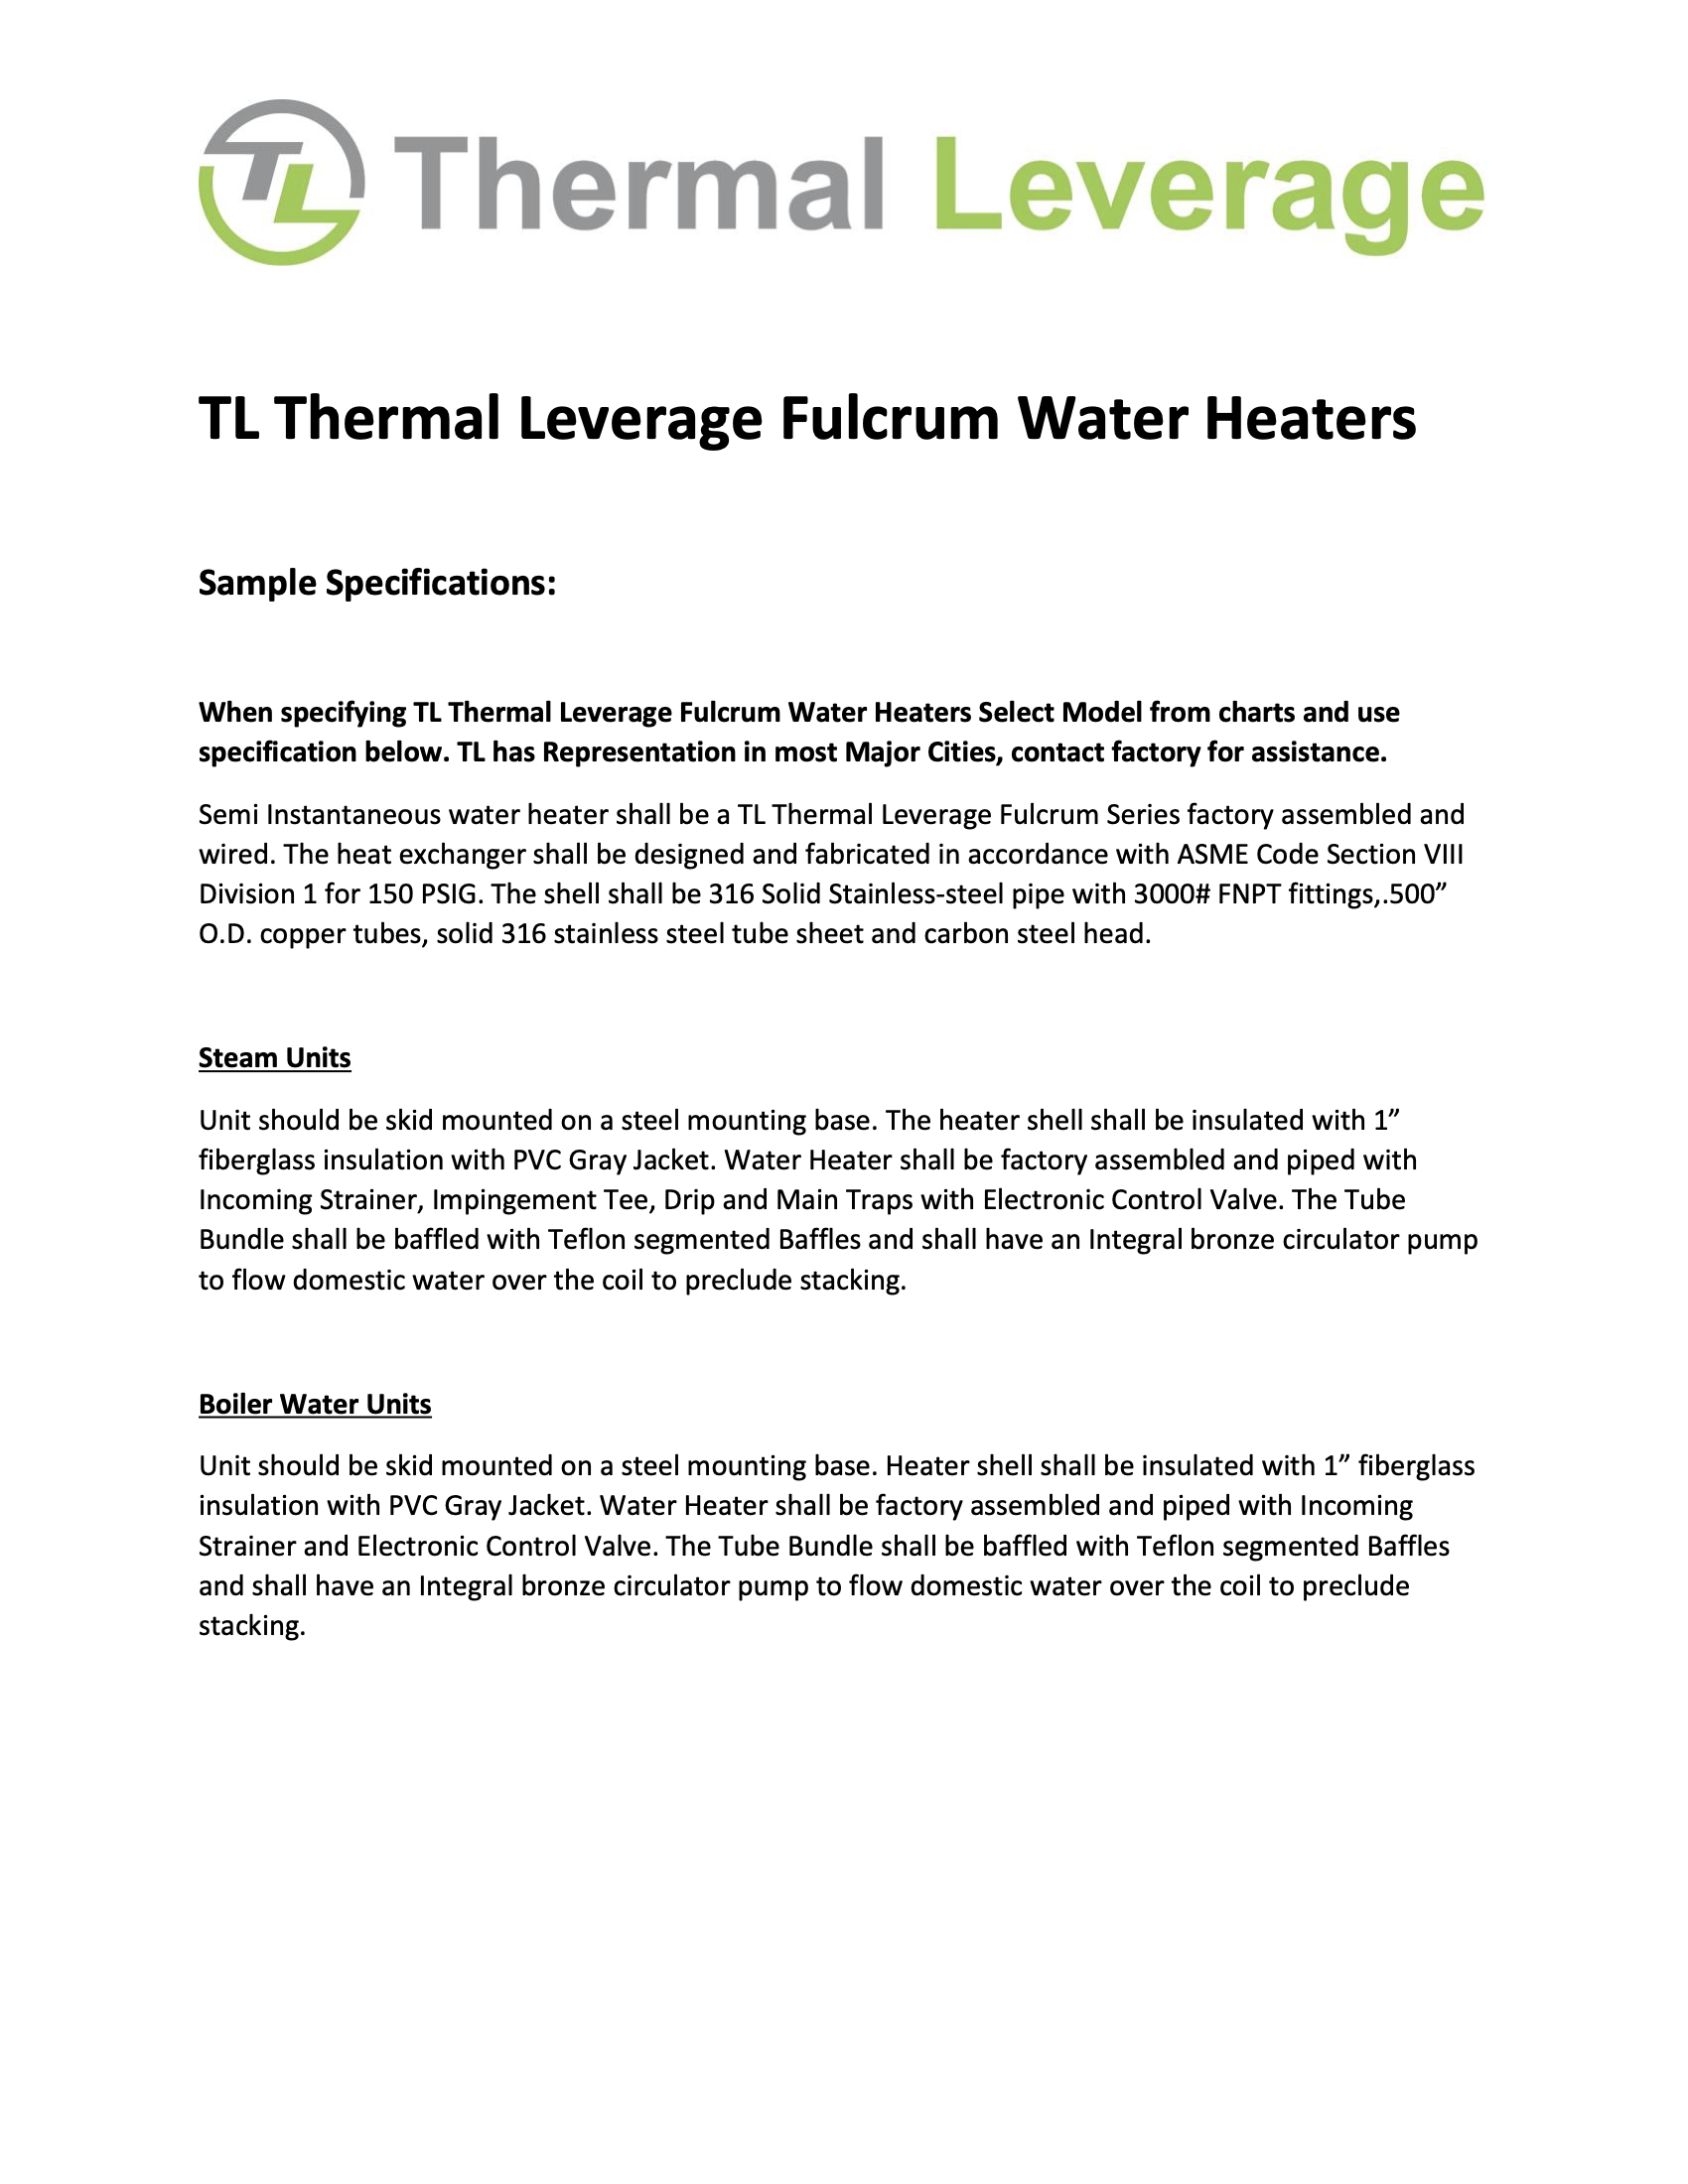 TL-Fulcrum-Water-Heaters-Specifications.png